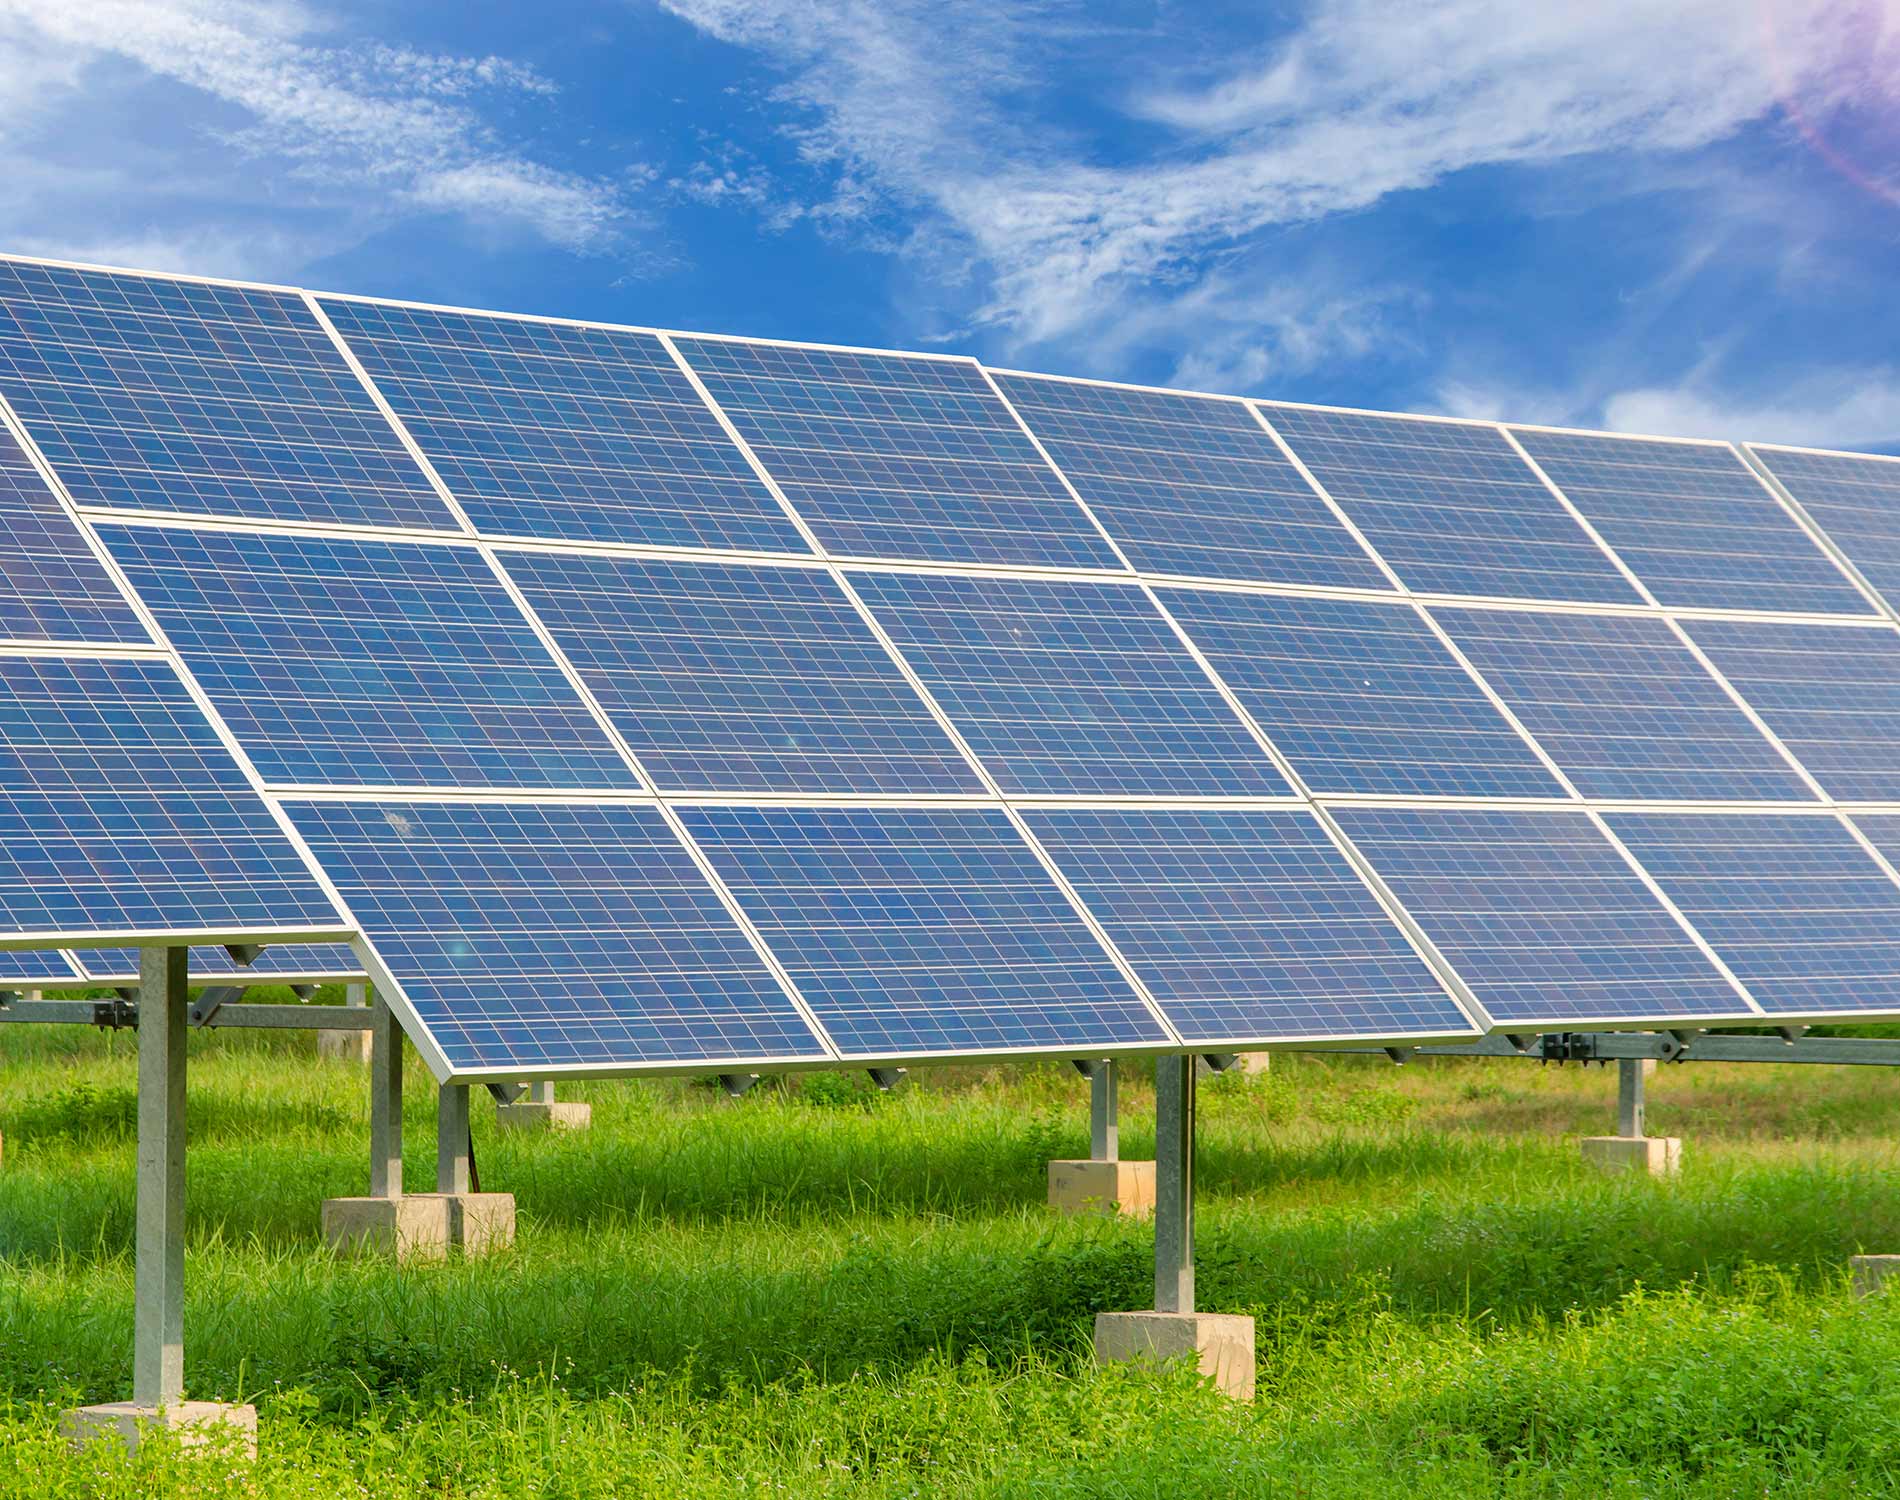 Dentons Dentons Advises Nordian Uk On The Sale Of Its Wick Farm Solar Pv Project